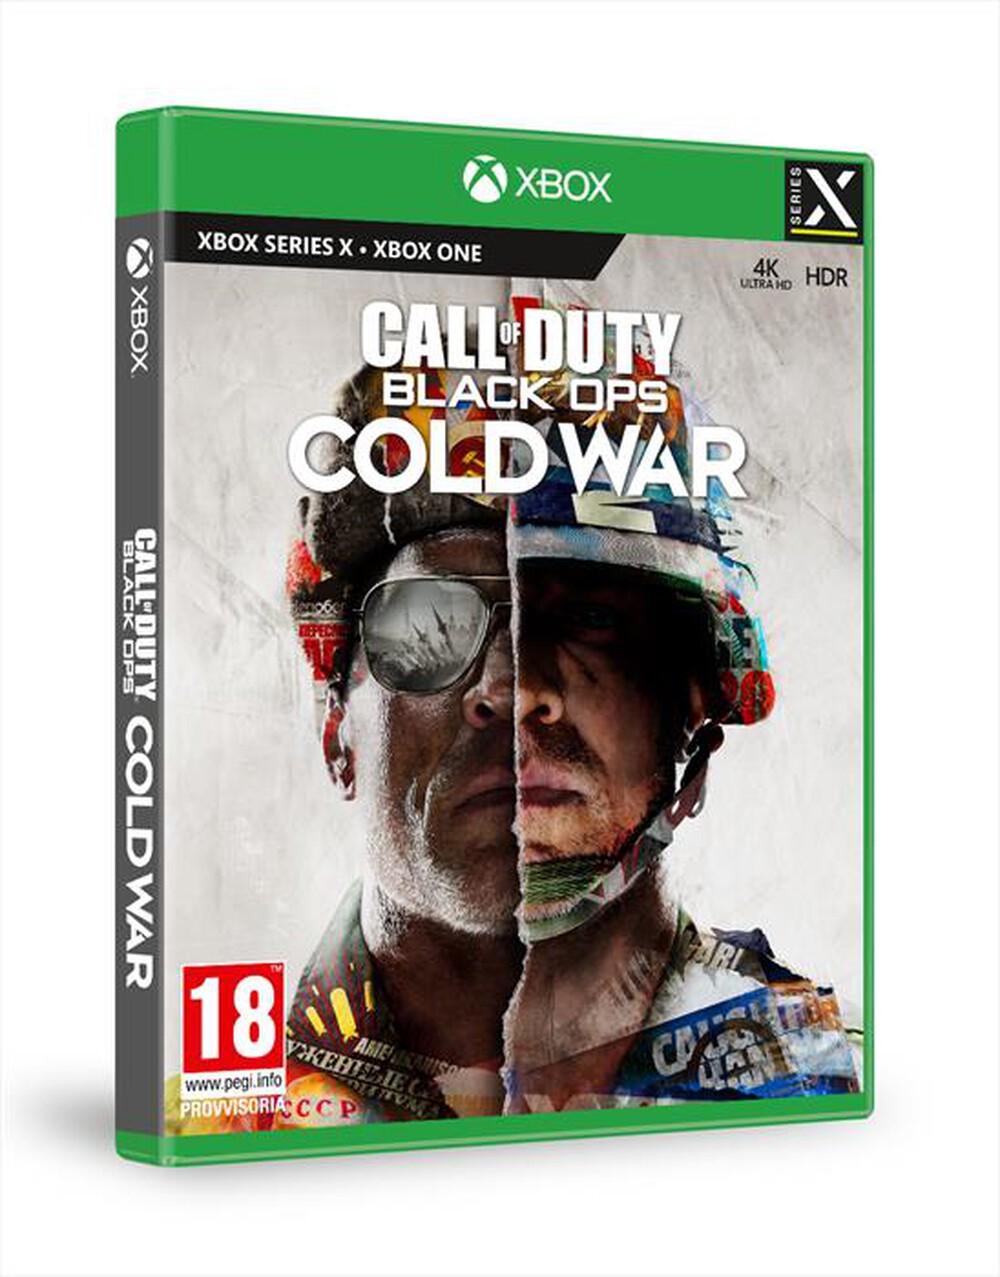 "ACTIVISION-BLIZZARD - CALL OF DUTY: BLACK OPS COLD WAR XBOX X"